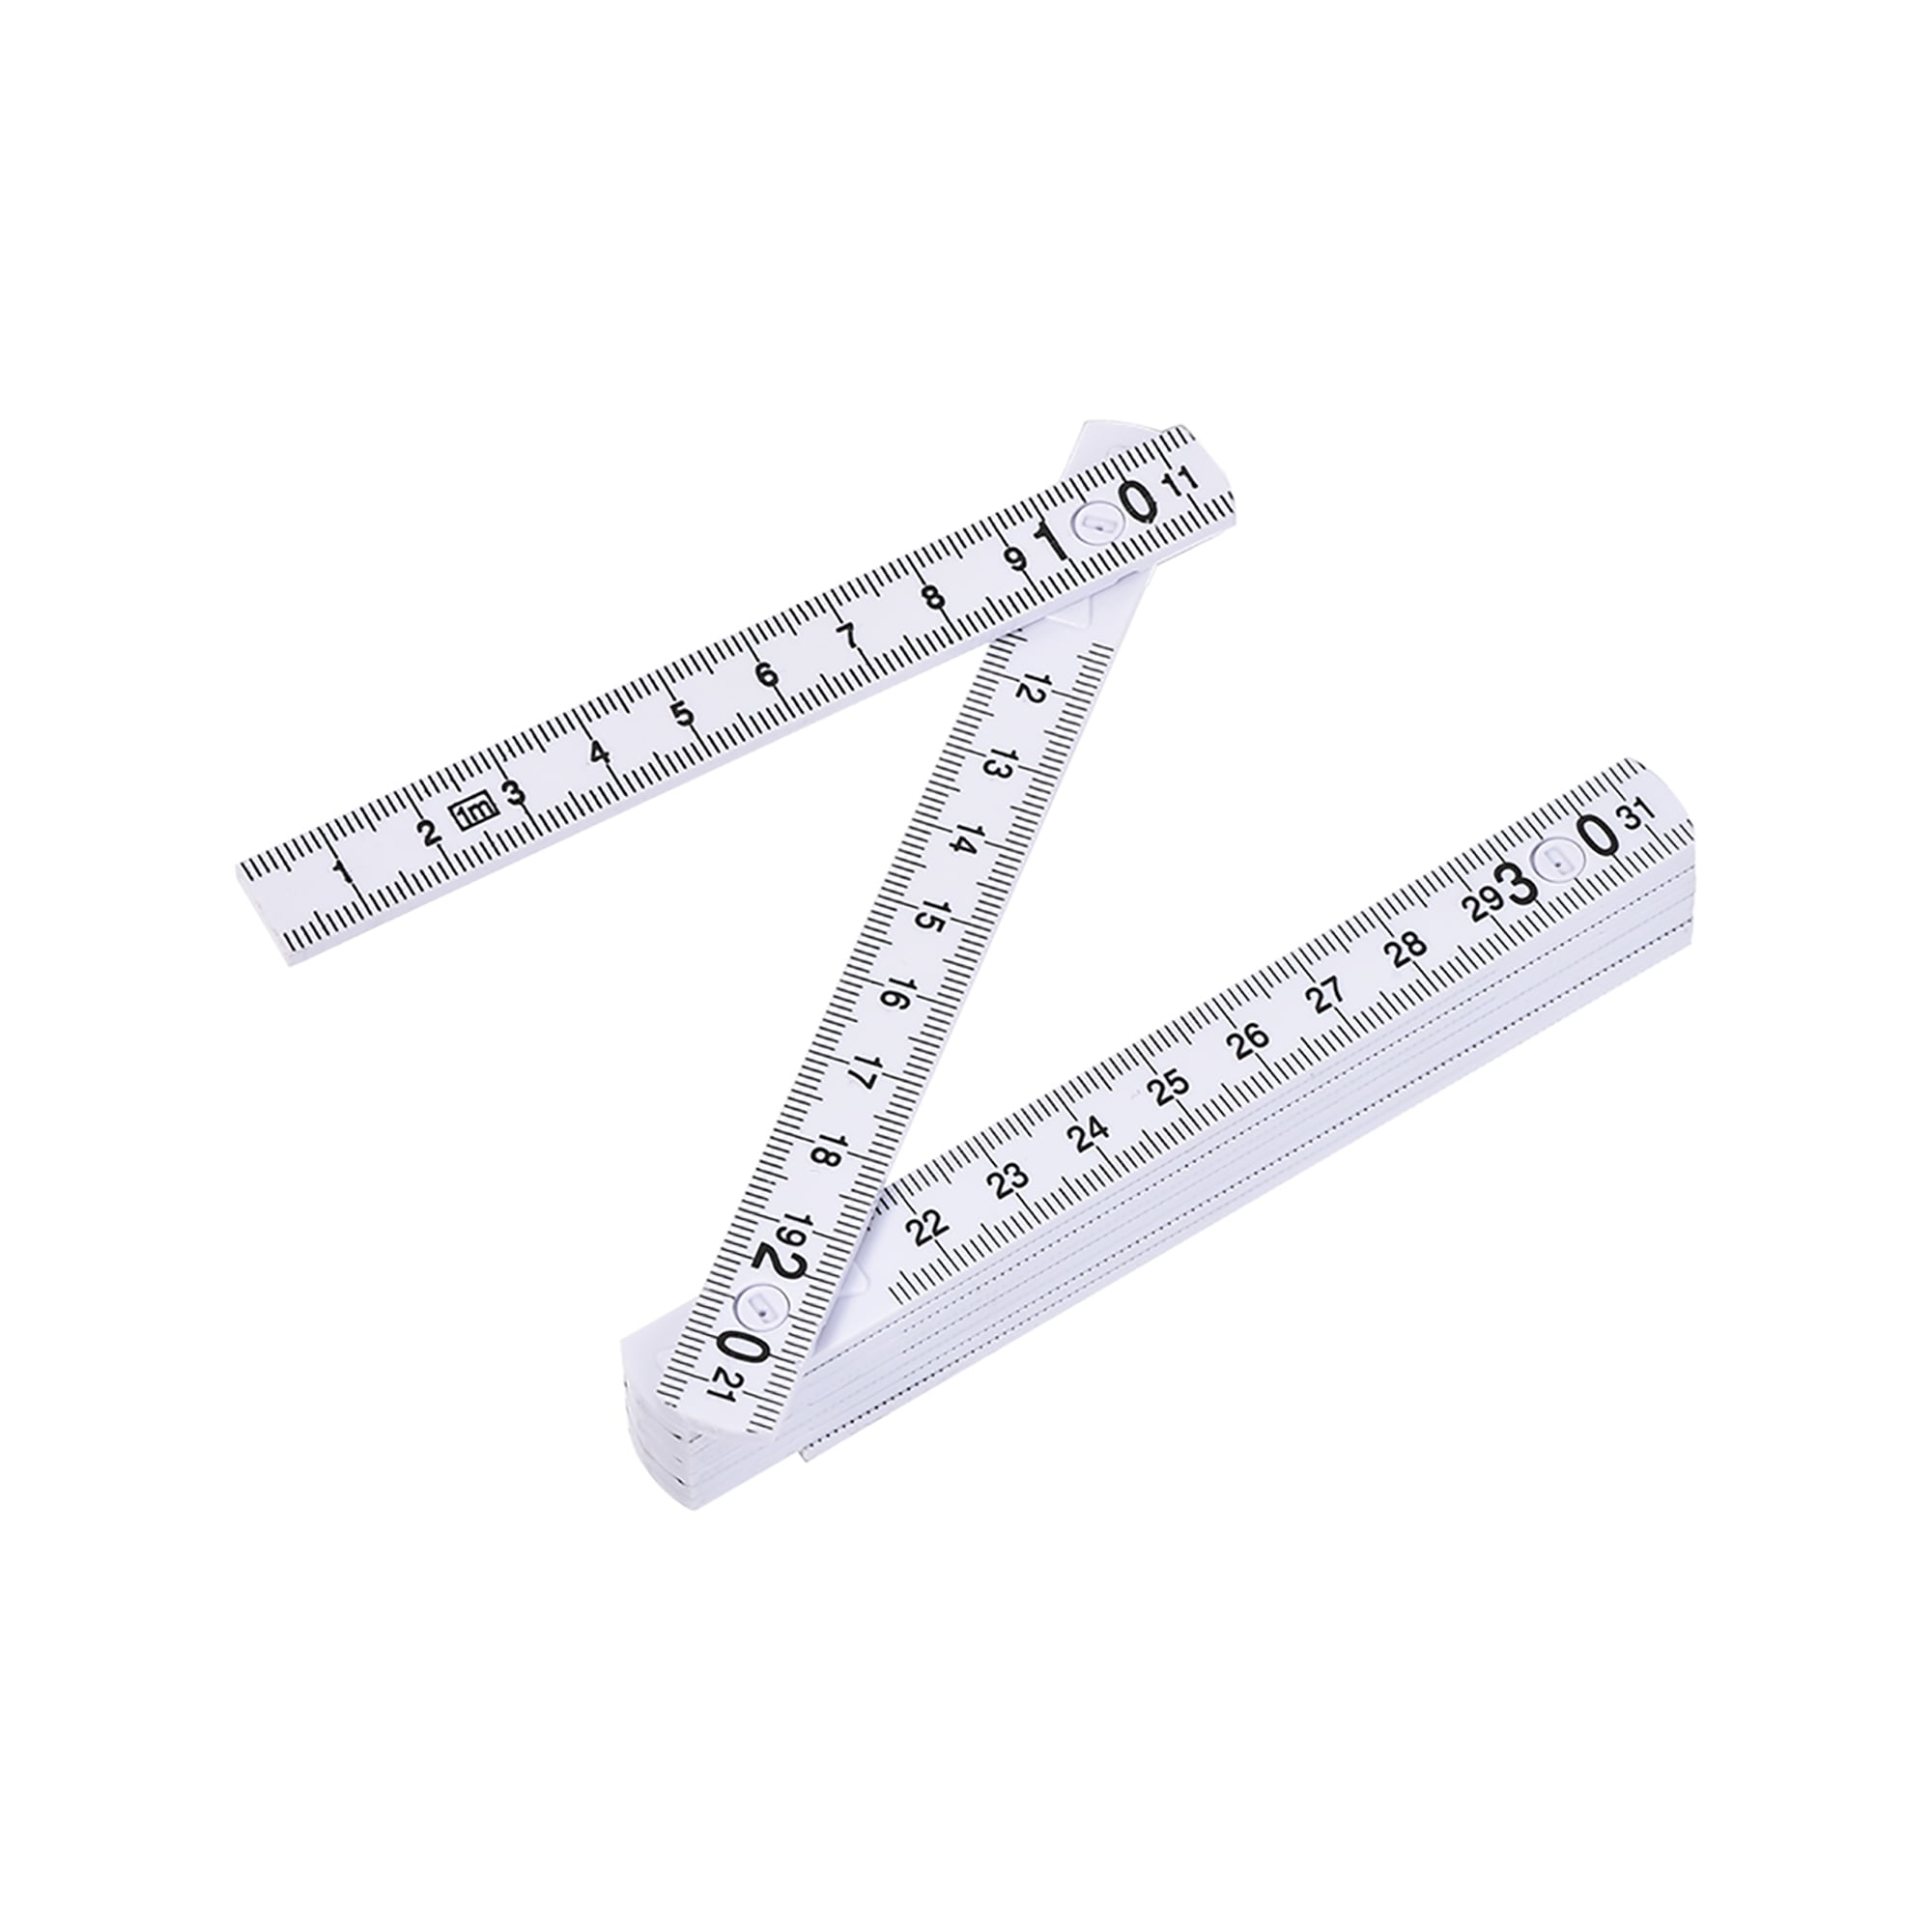 1m or 2m Long Folding Wooden Ruler Measuring Tool with Metal Tips & Joints 